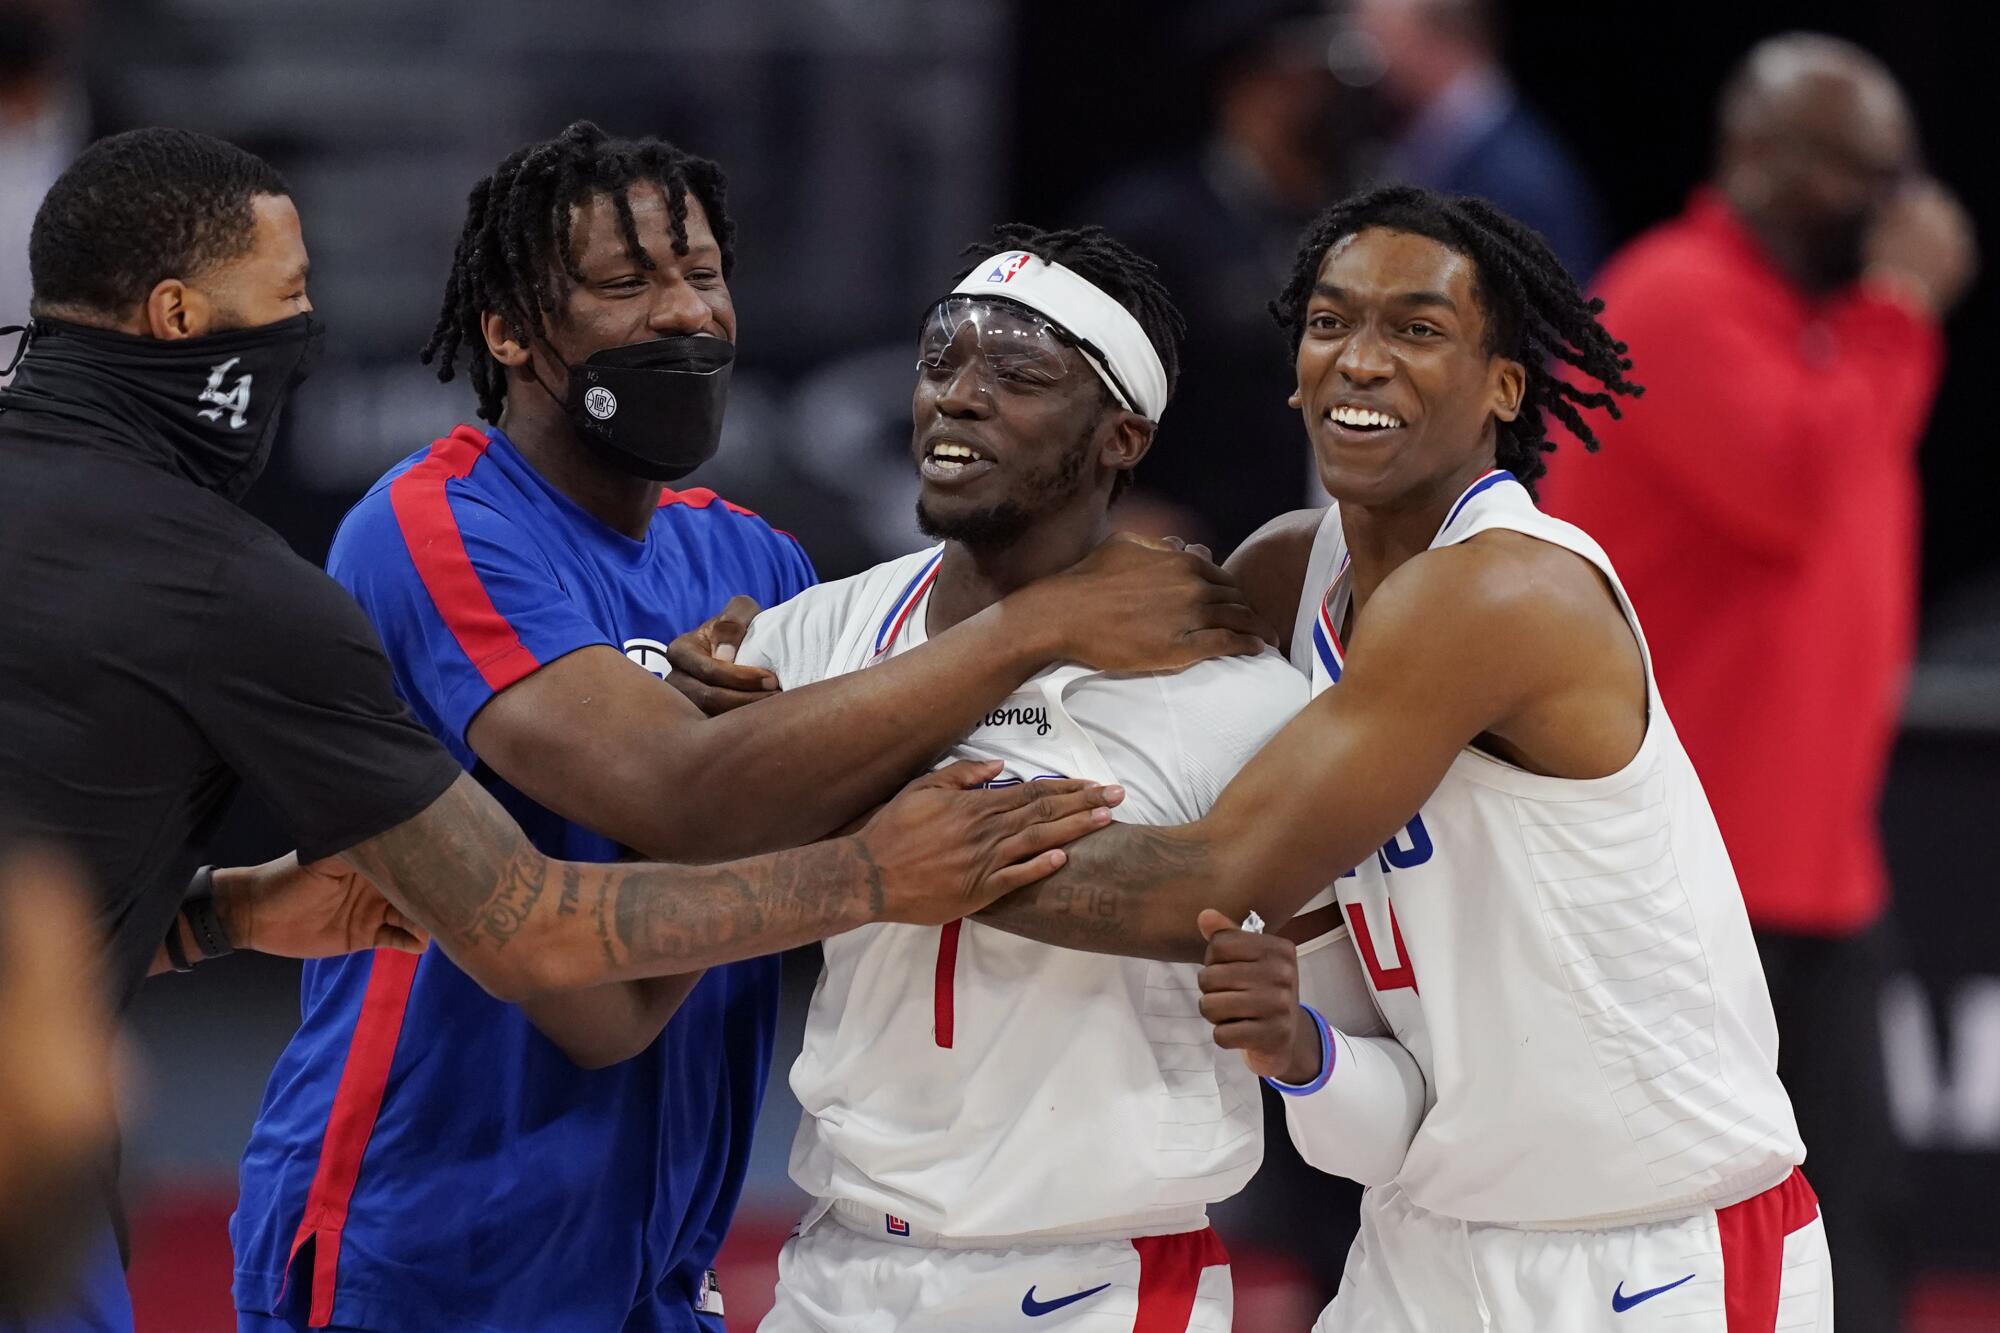 Clippers guard Reggie Jackson is swarmed by teammates after making the game-winning basket against the Pistons.